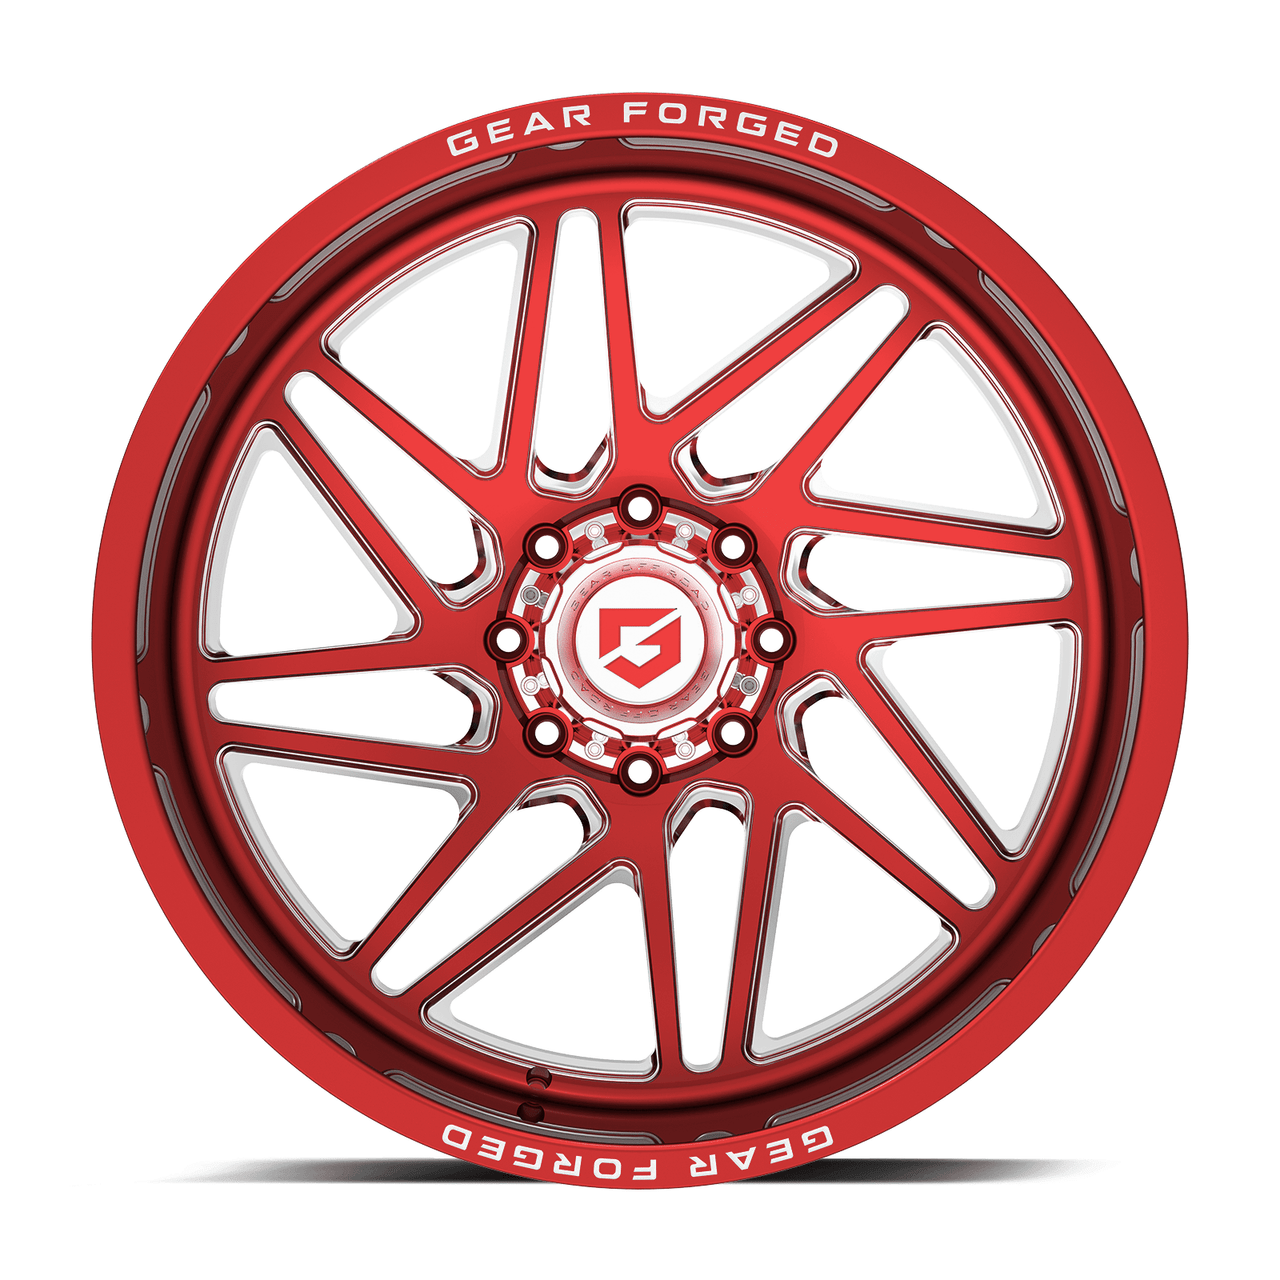 Set 4 24" Gear Forged GF761RT polished & red tint clear w/milled accents & lip logo 24x14 Wheels 6x5.50 -76mm